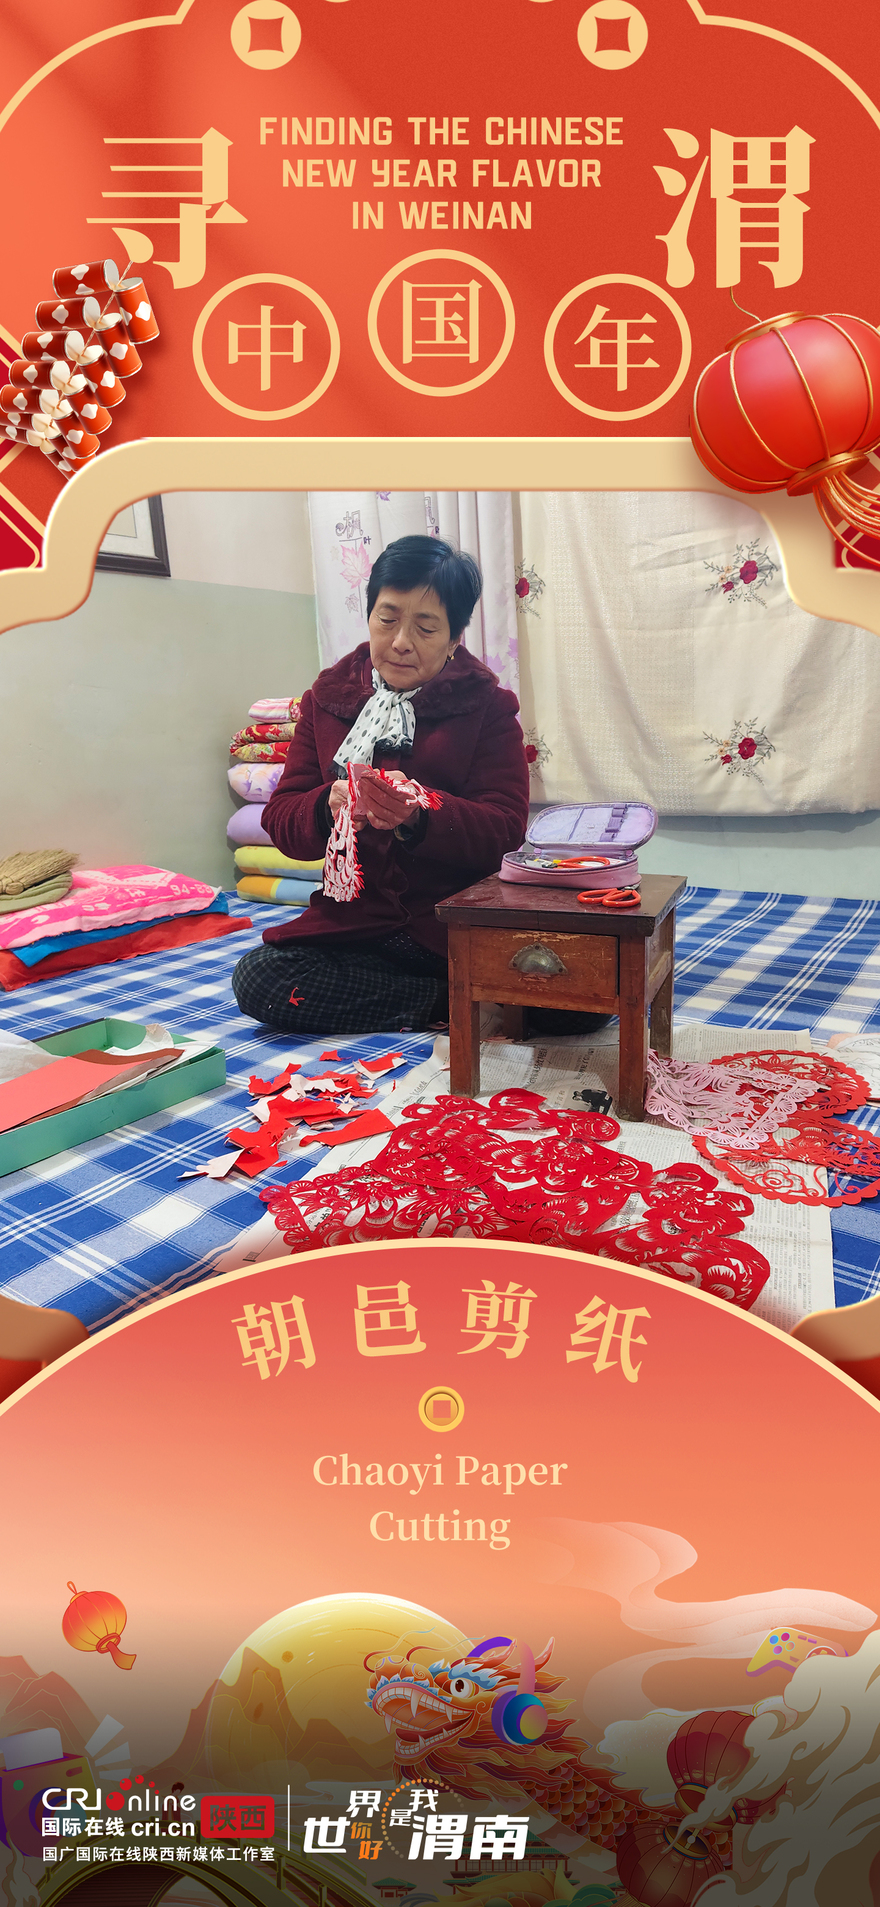 Finding the Chinese New Year Flavor in Weinan_fororder_微信图片_20240209111153